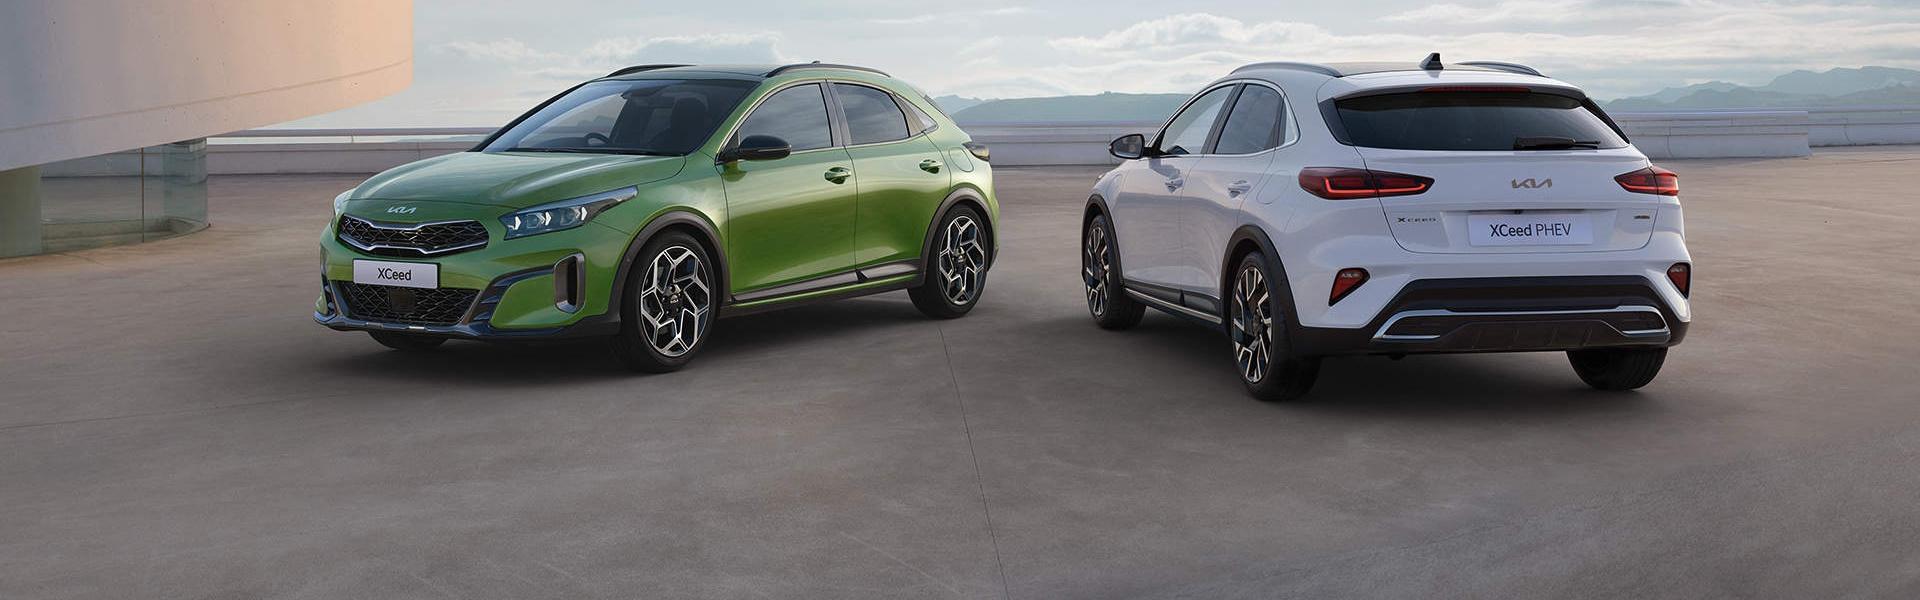 Front view of a green Kia XCeed and a white Kia XCeed PHEV